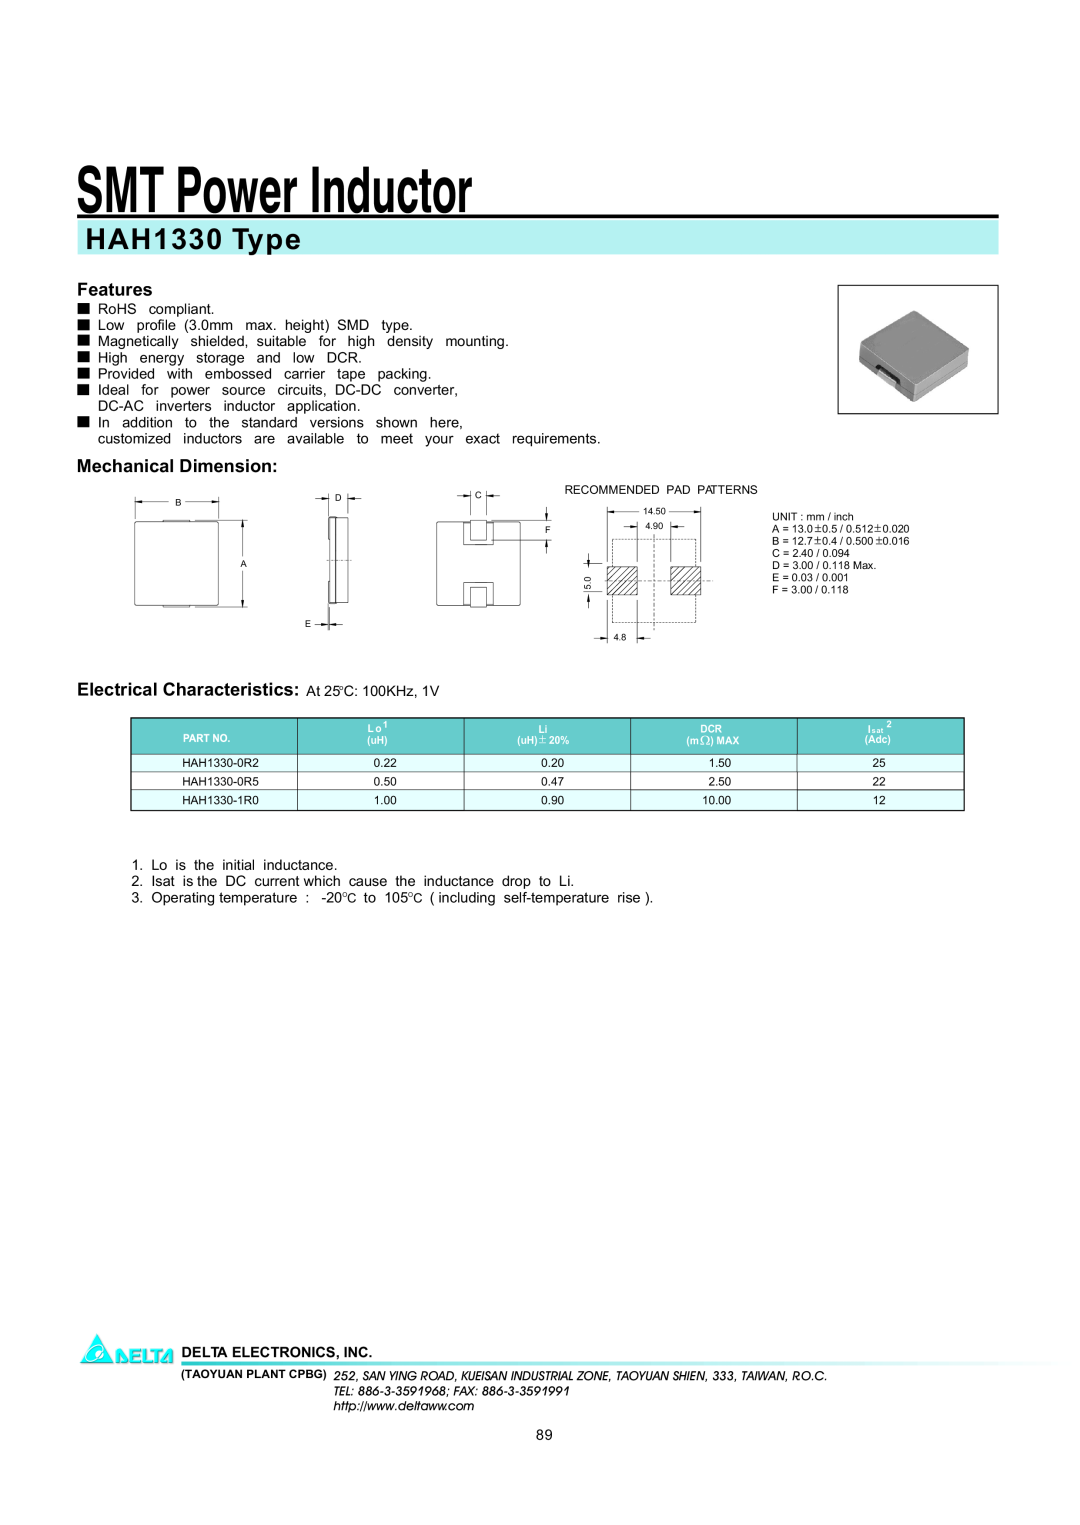 Delta Electronics manual SMT Power Inductor, HAH1330 Type, Features, Mechanical Dimension, Delta Electronics, Inc 